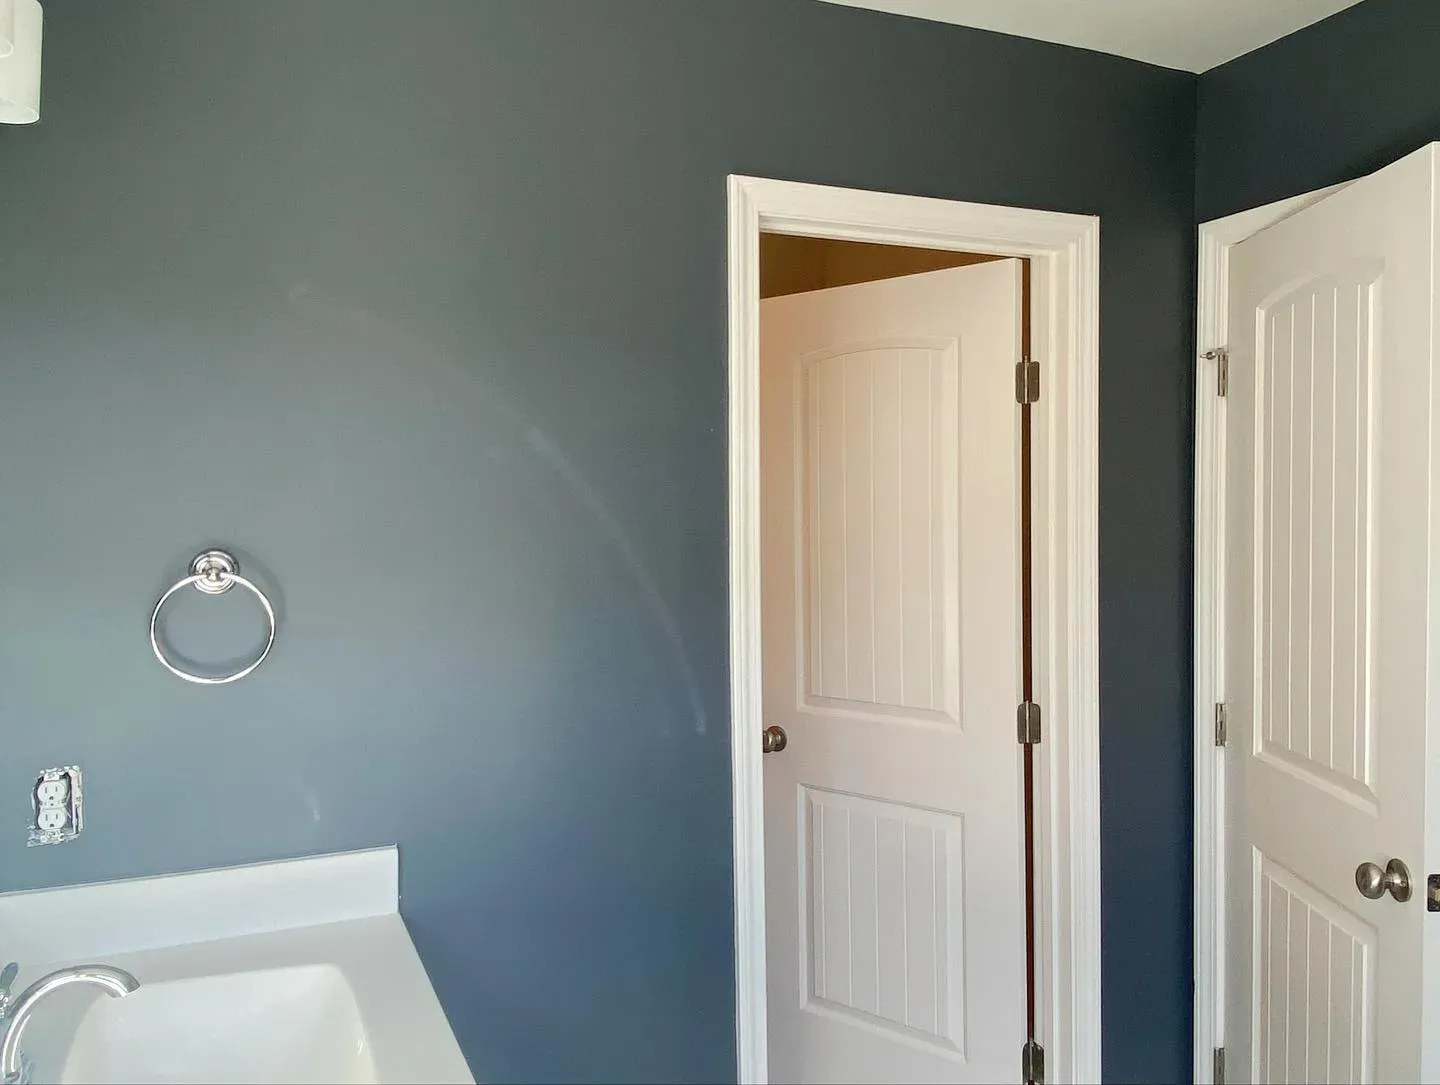 Sherwin Williams paint colors for bathroom